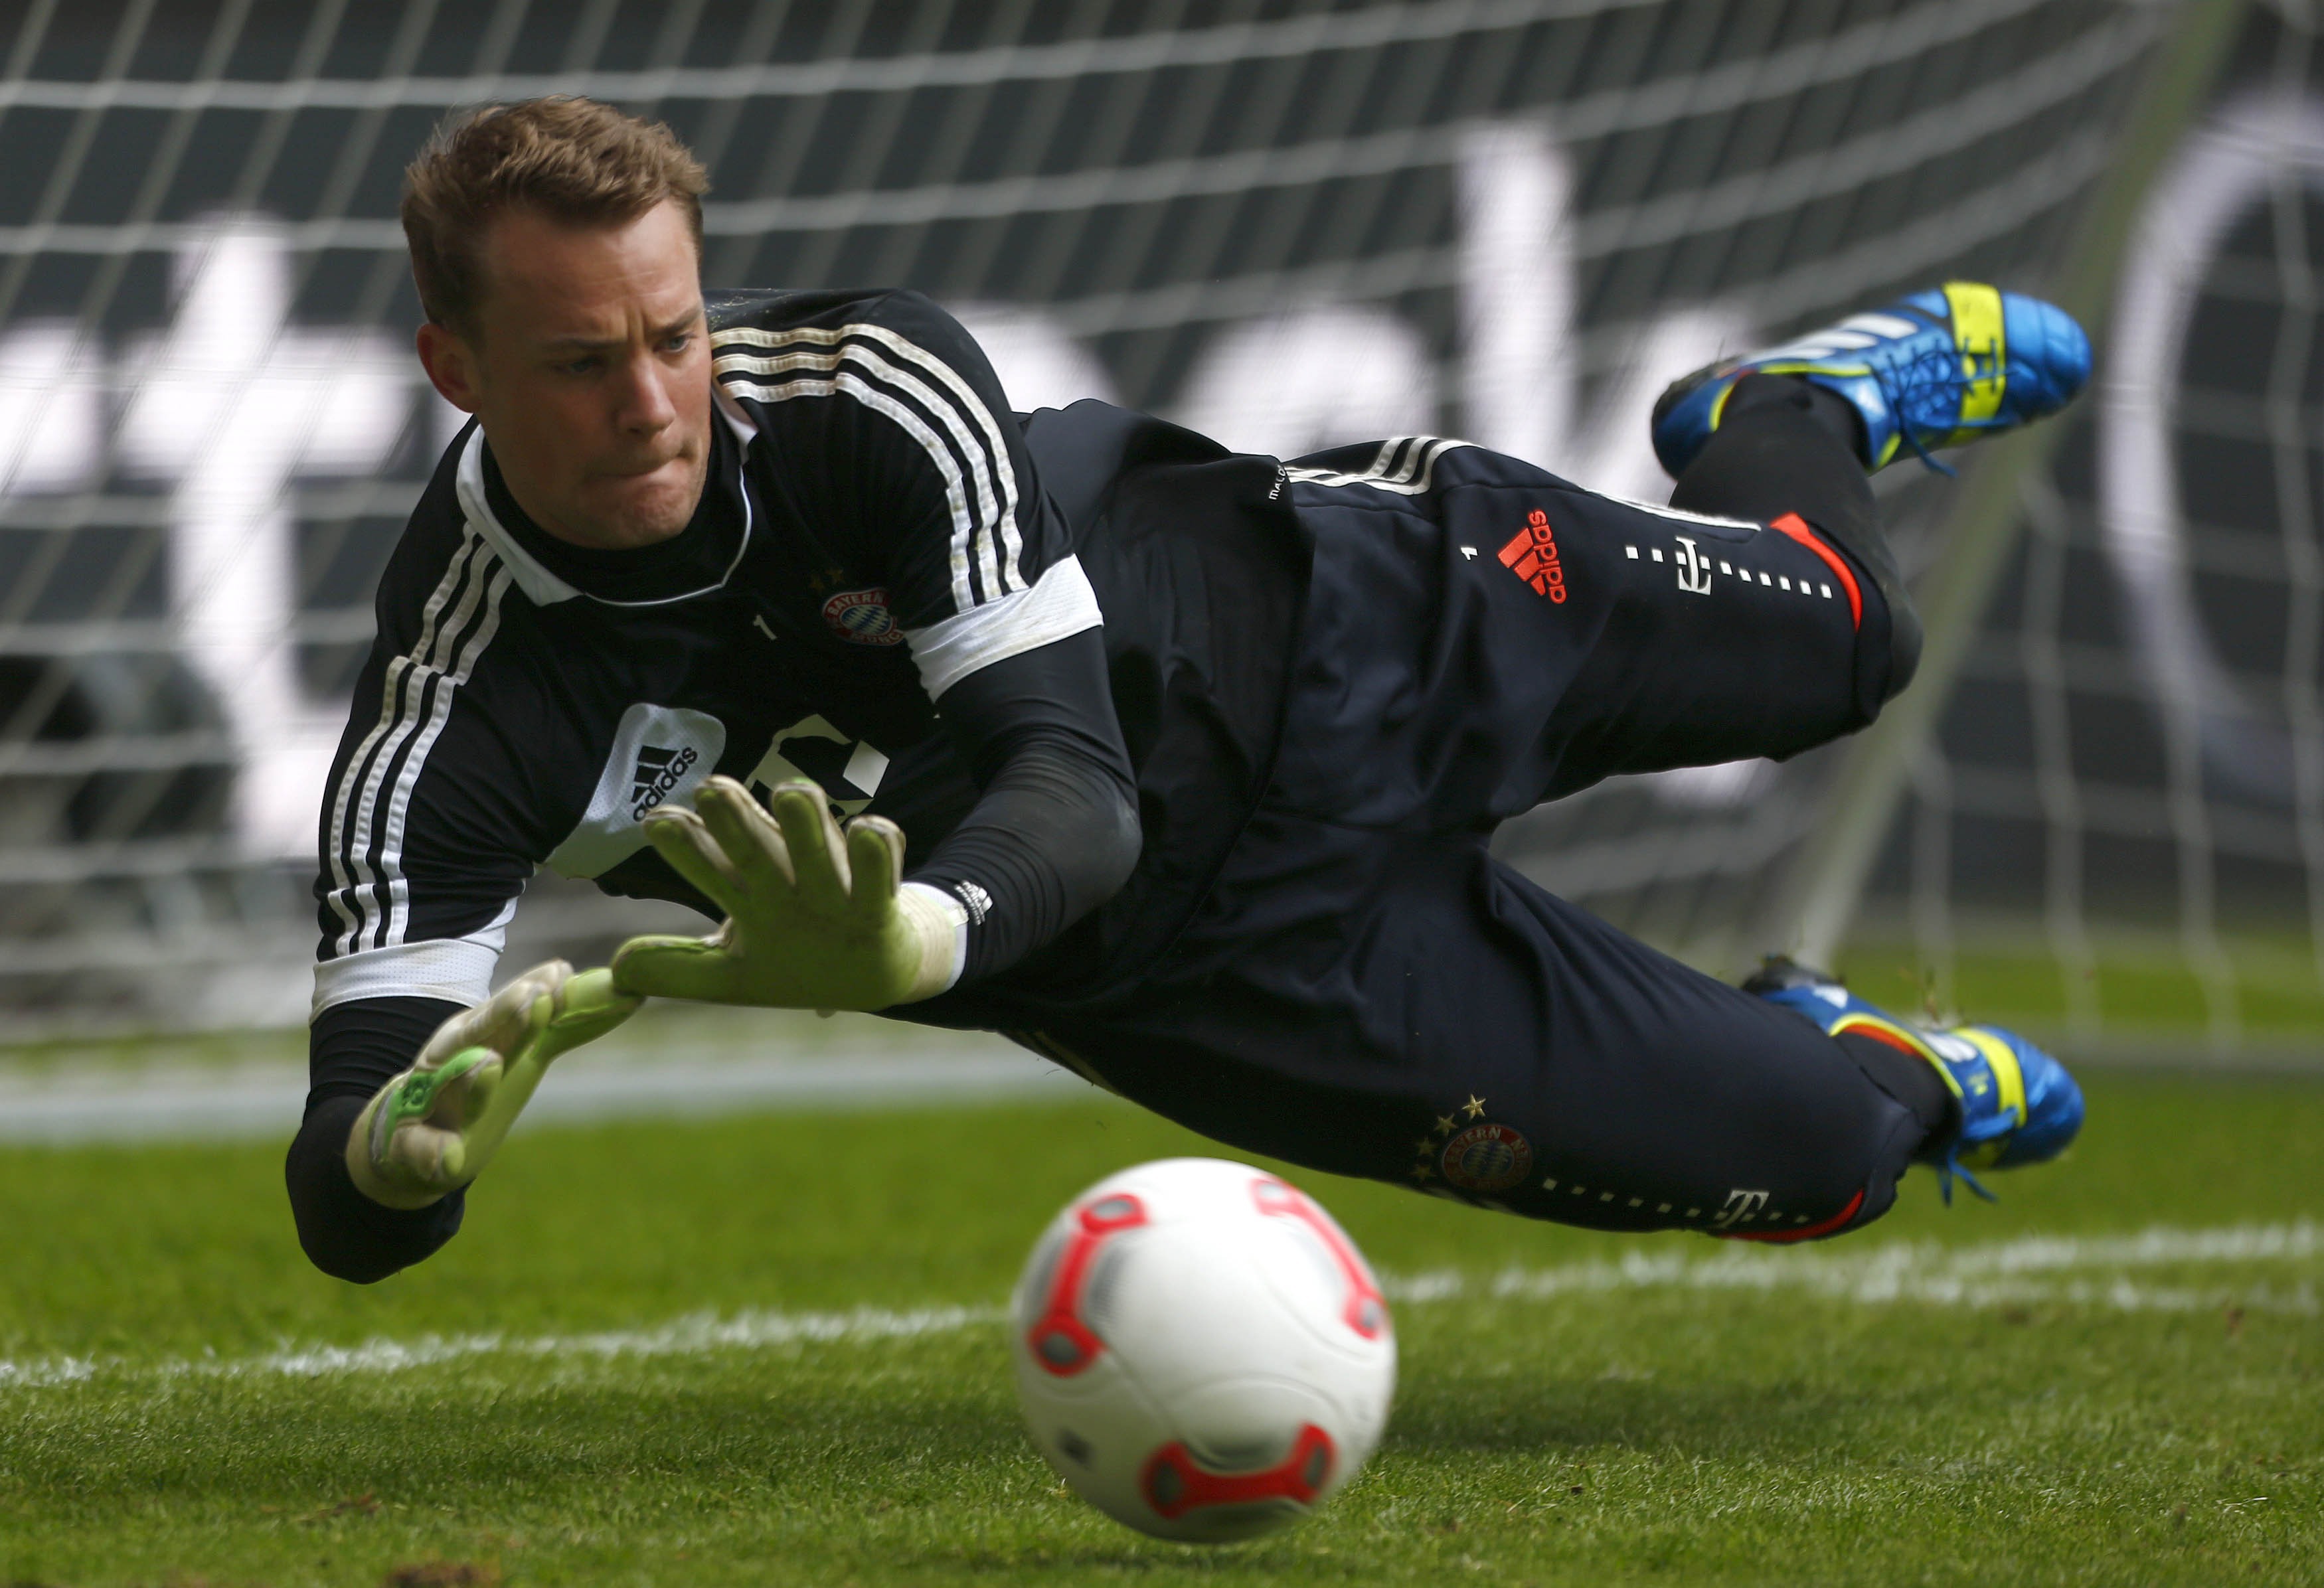 Free download The goalkeeper of Bayern Manuel Neuer is catching a ball